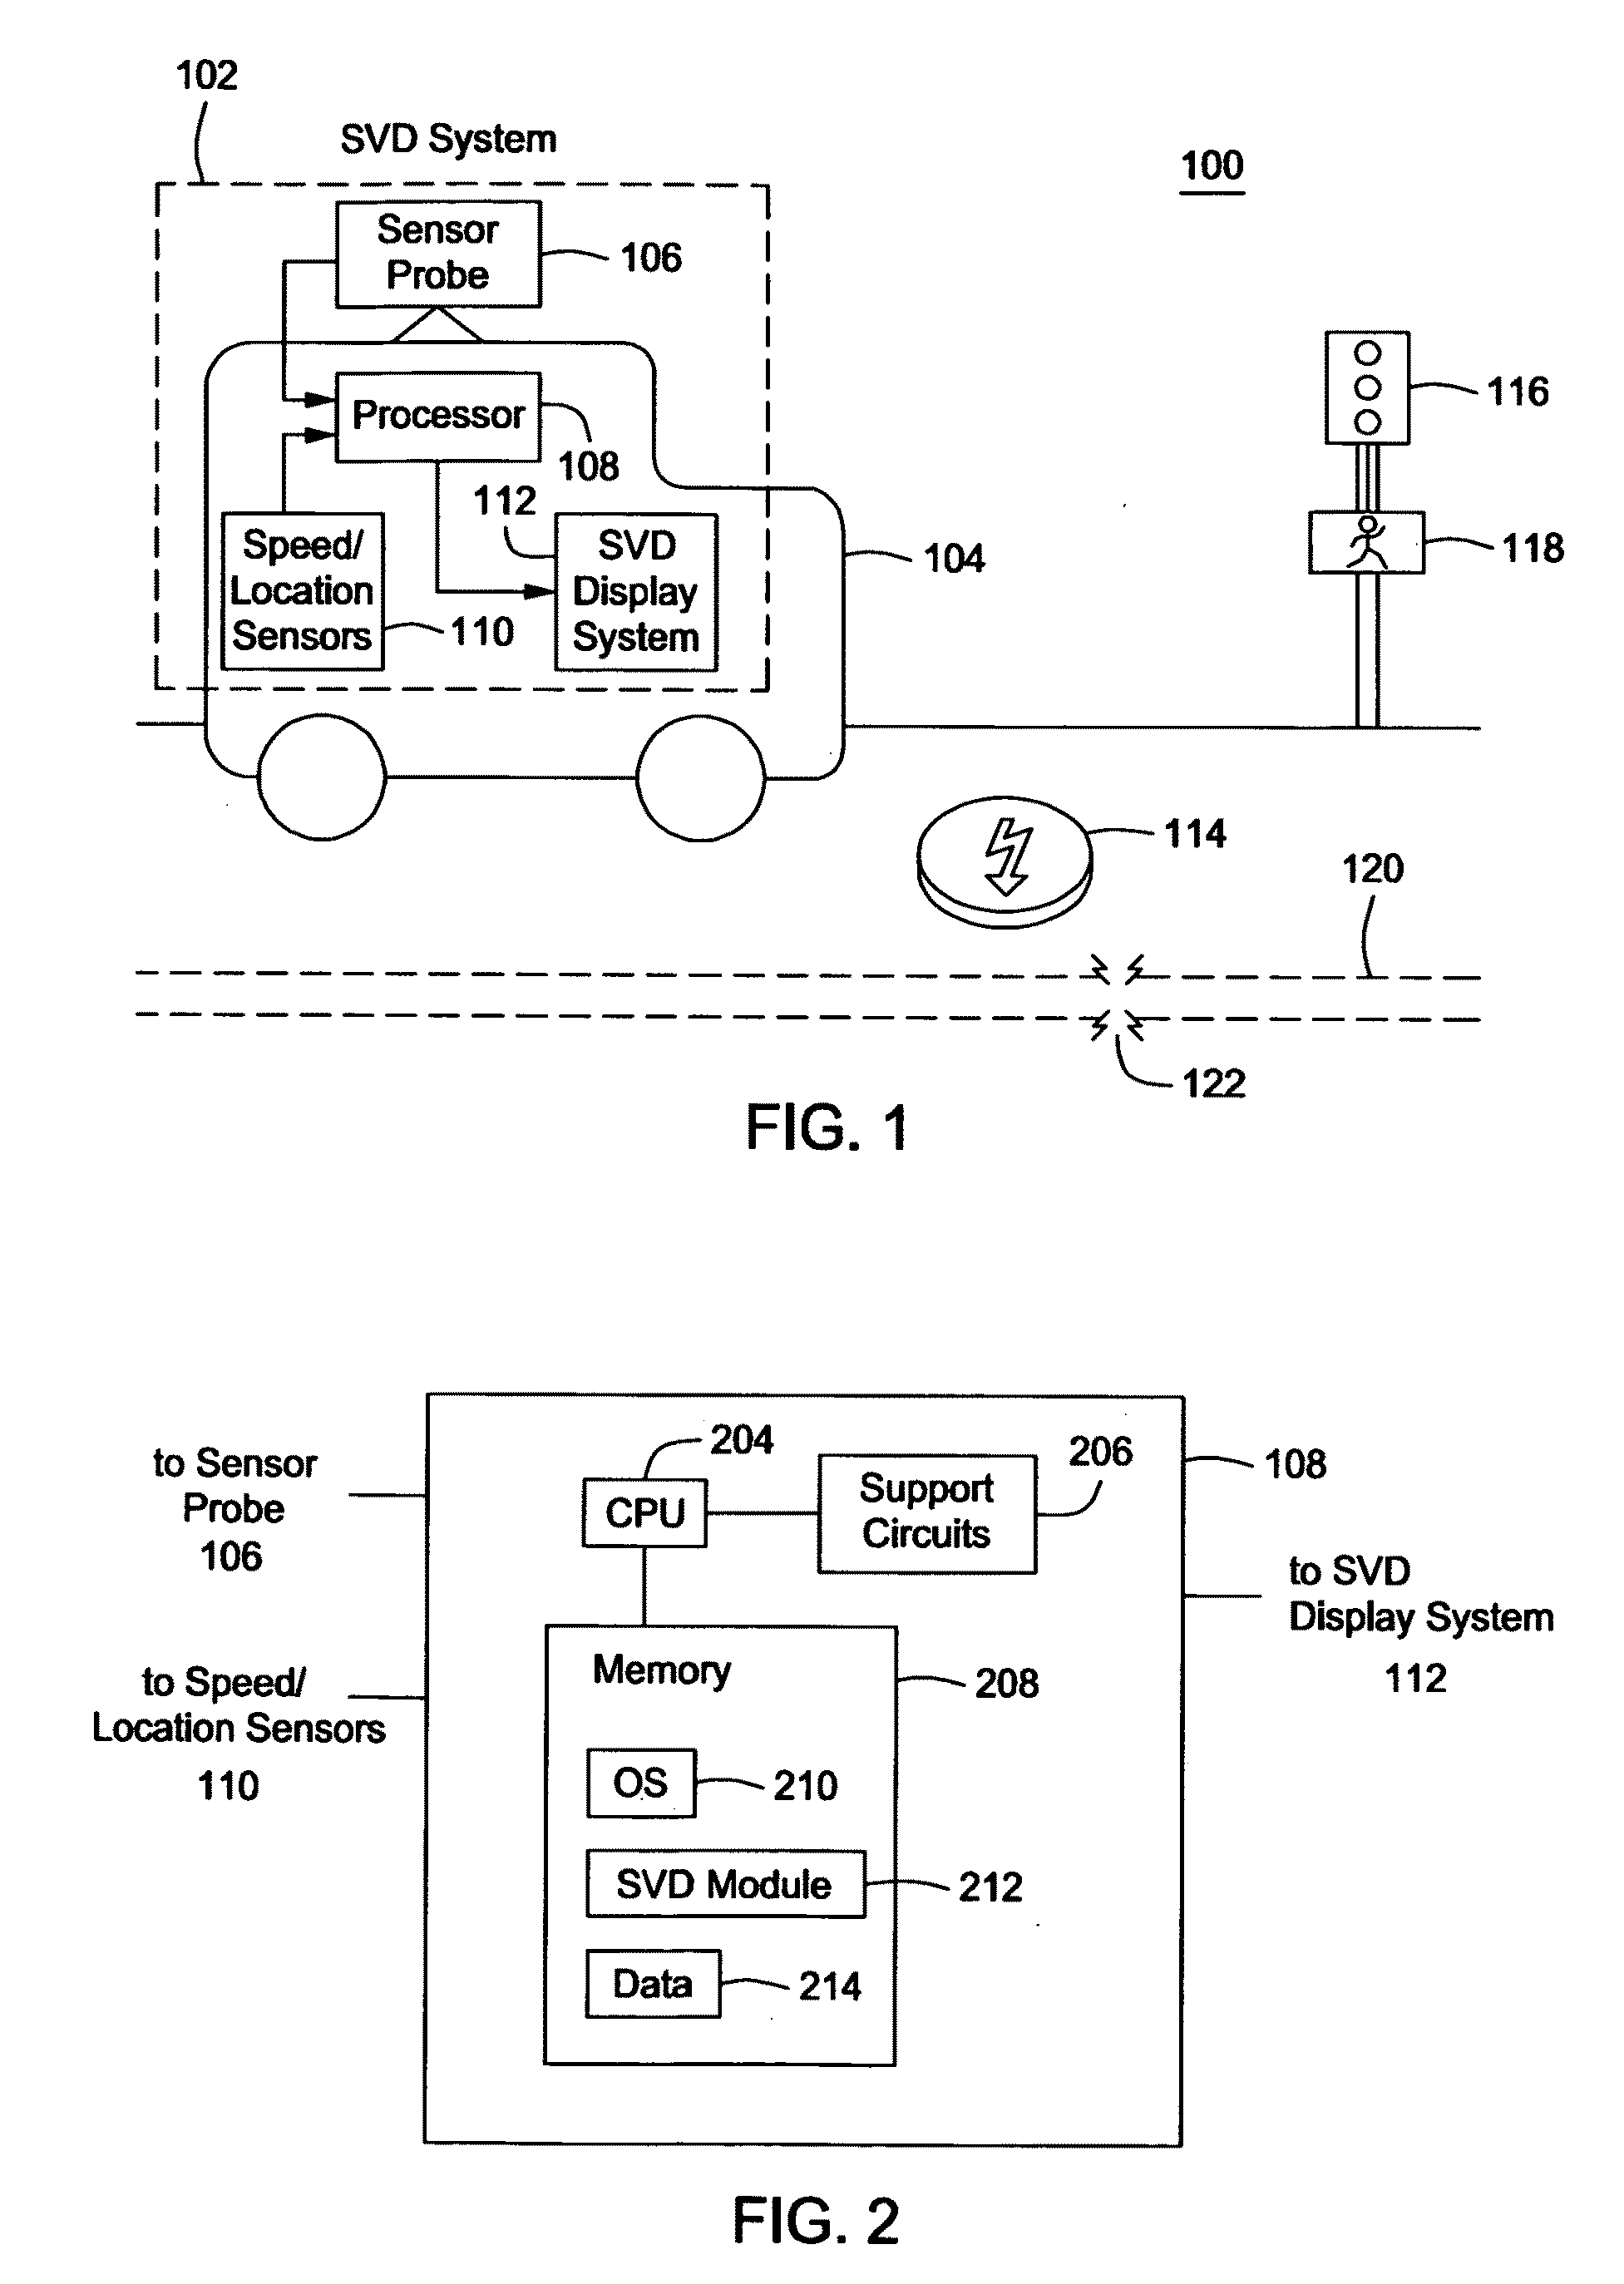 Method and apparatus for discrimination of sources in stray voltage detection